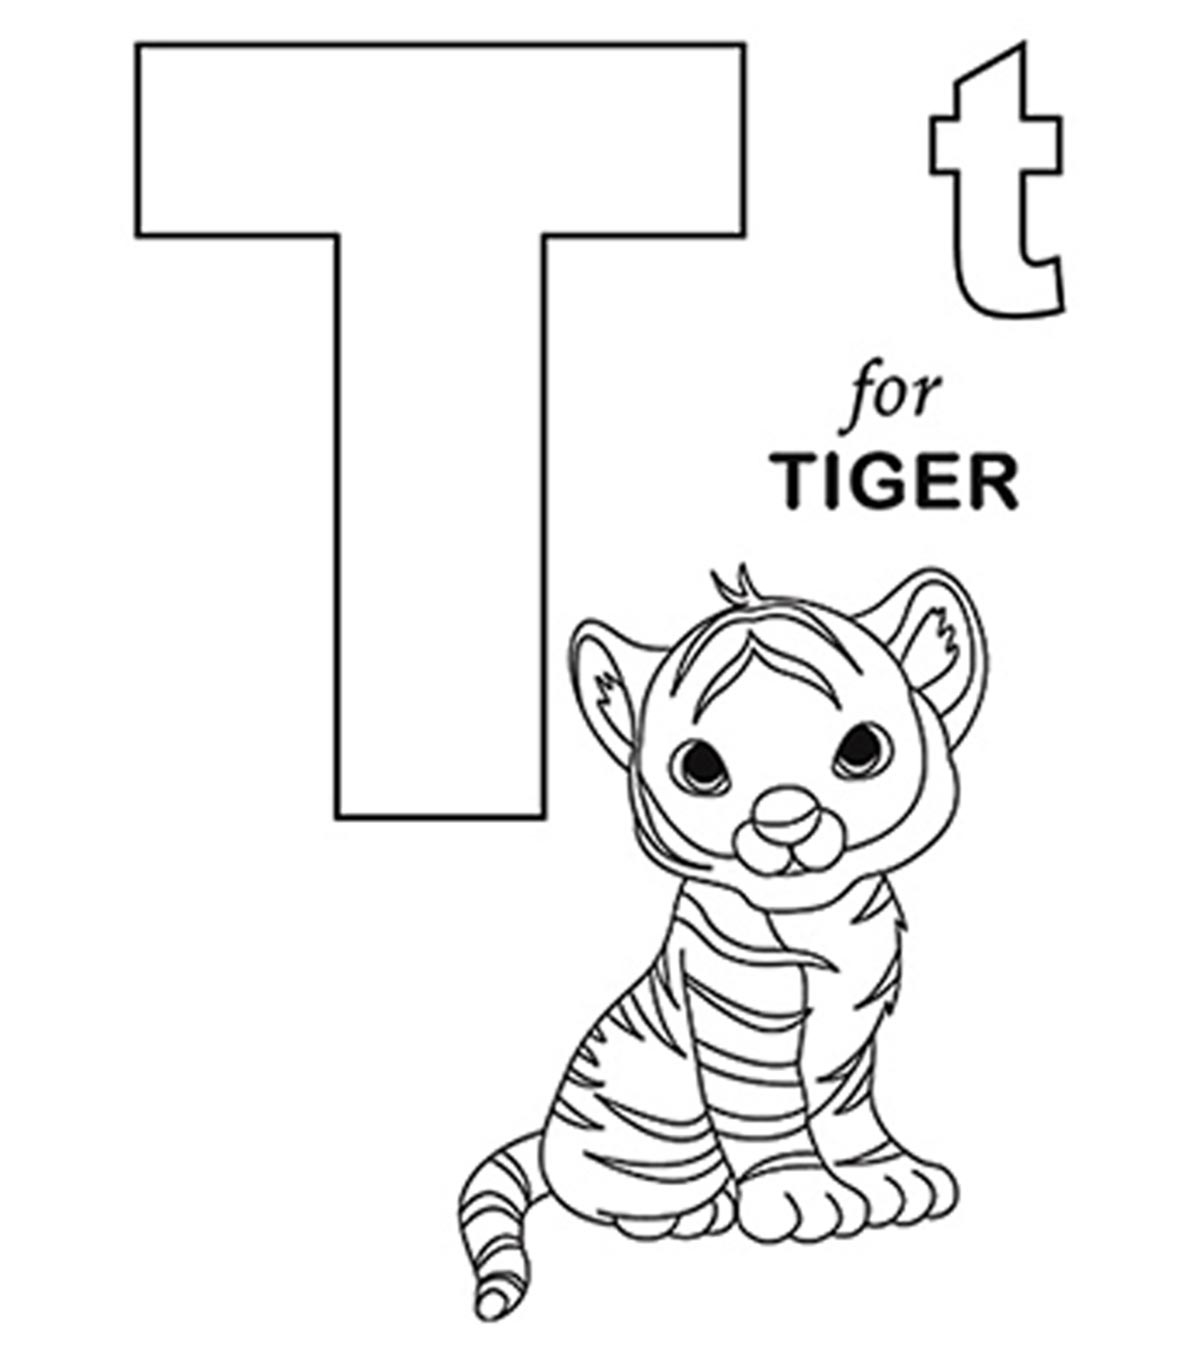 Top 10 Letter ‘T’ Coloring Pages Your Toddler Will Love To Learn & Color